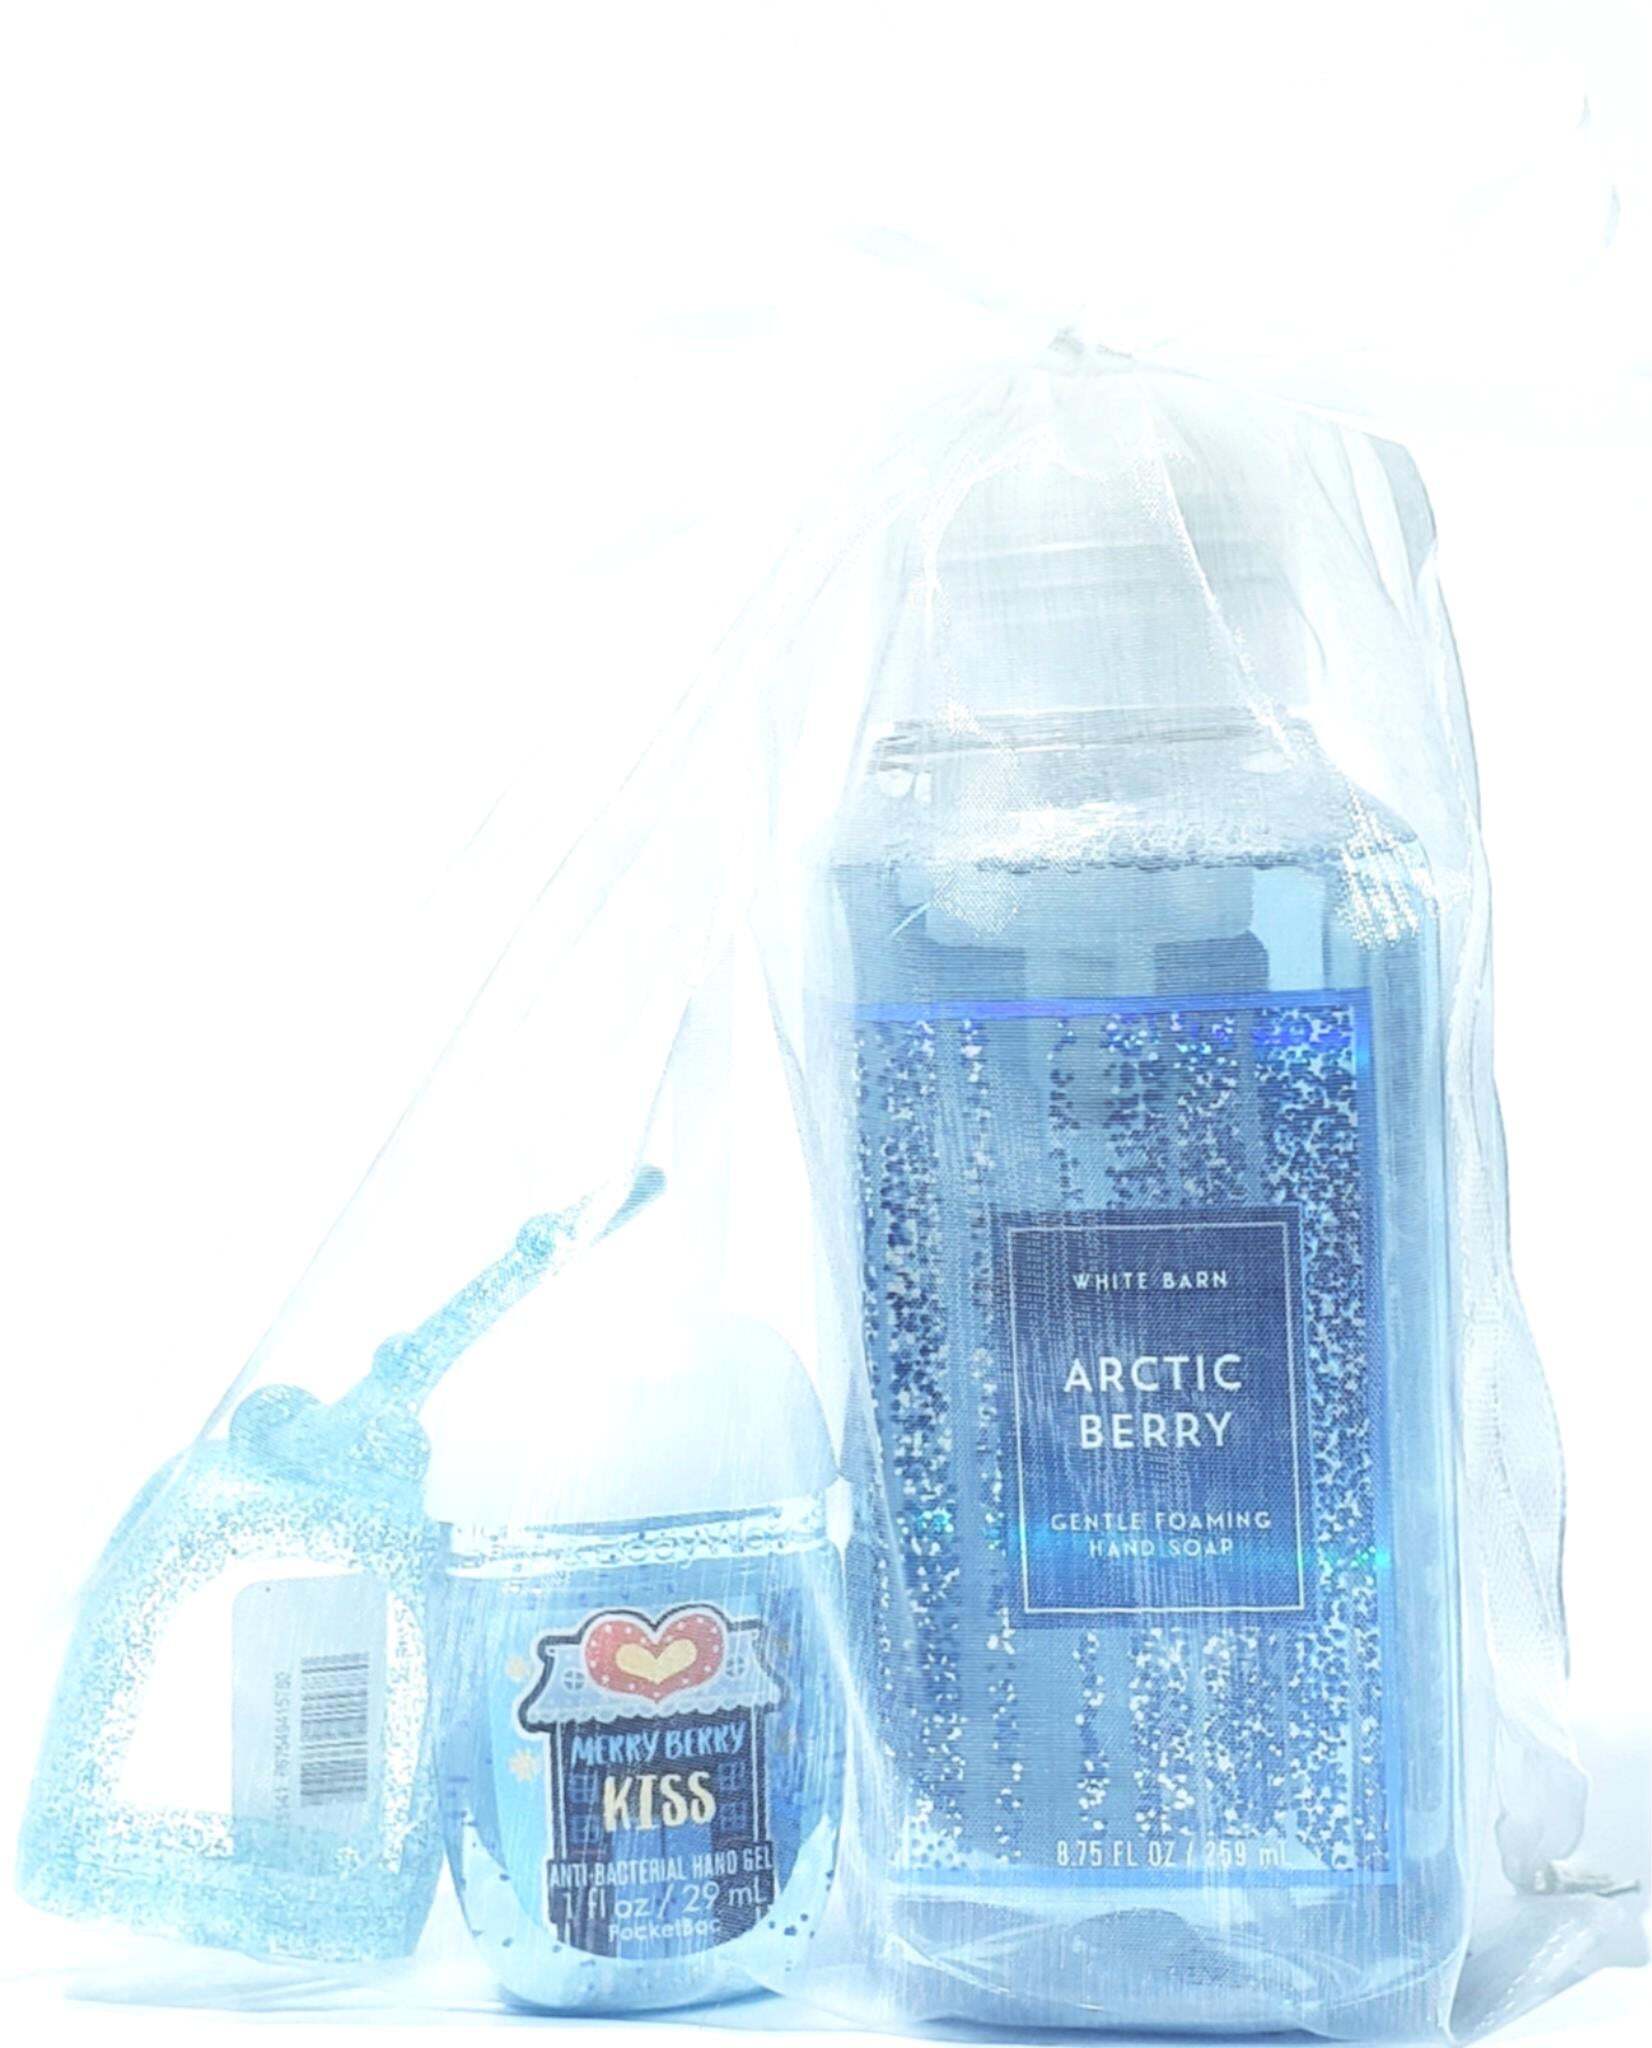 Arctic Berry Hand Soap and Soft Blue Case Holder